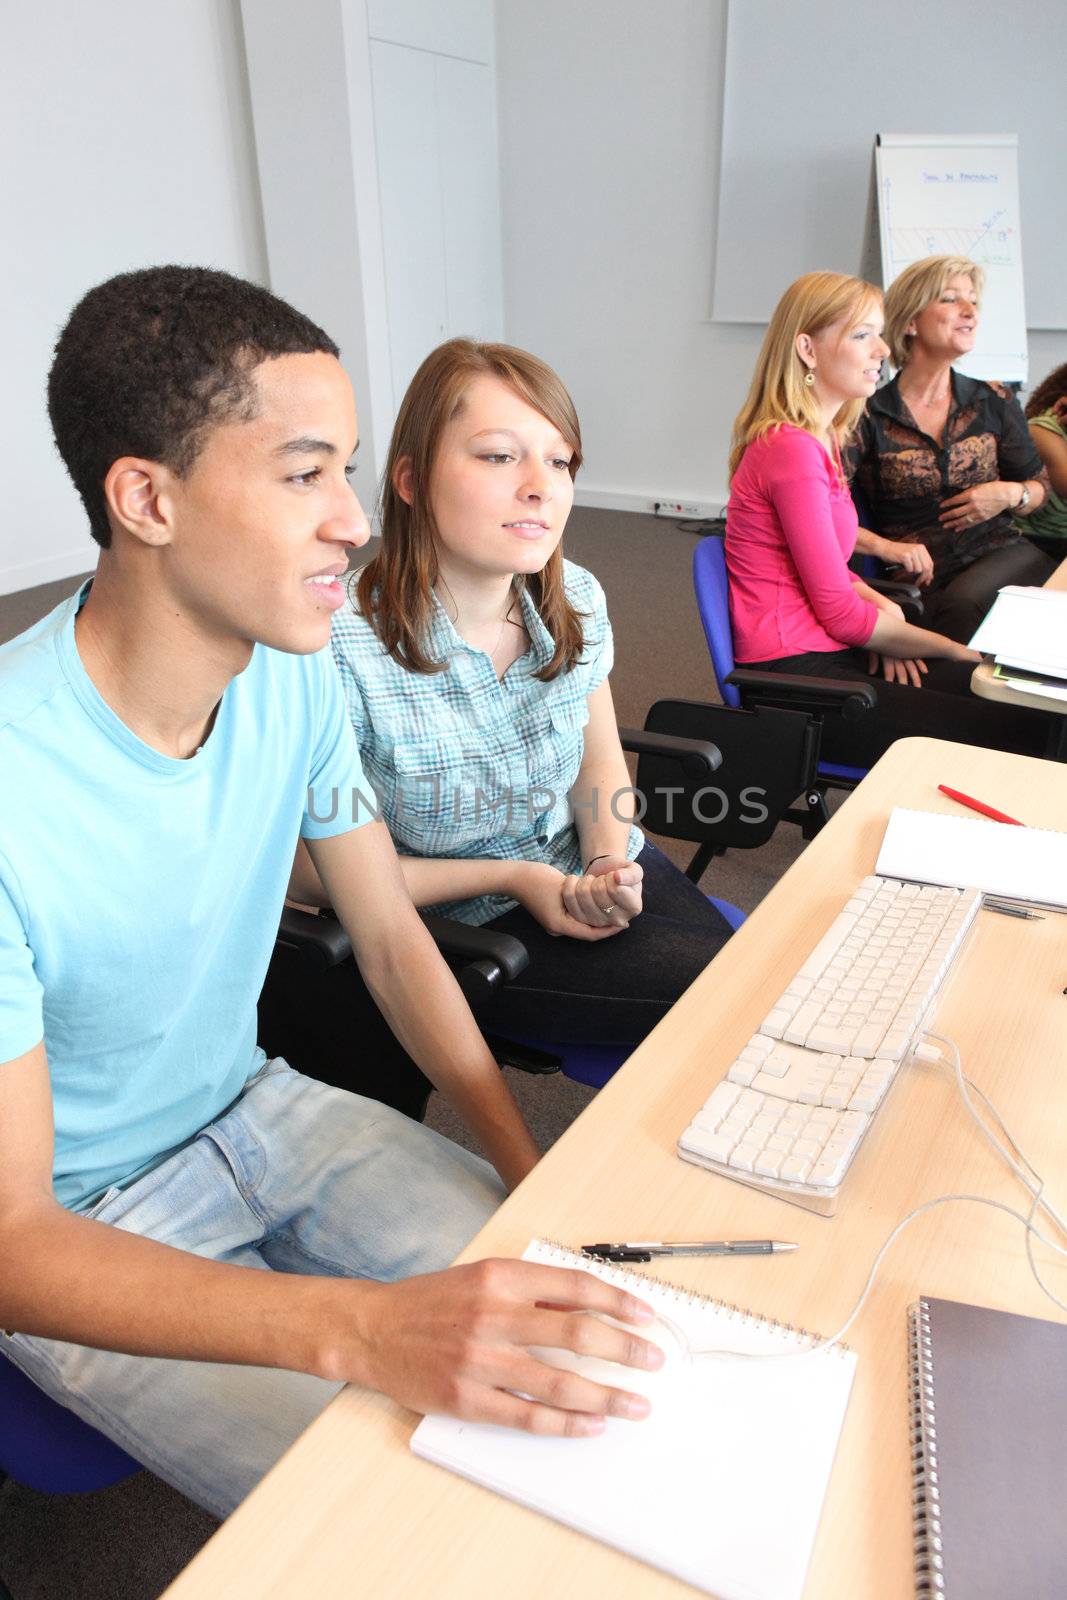 Teens in computer class by phovoir